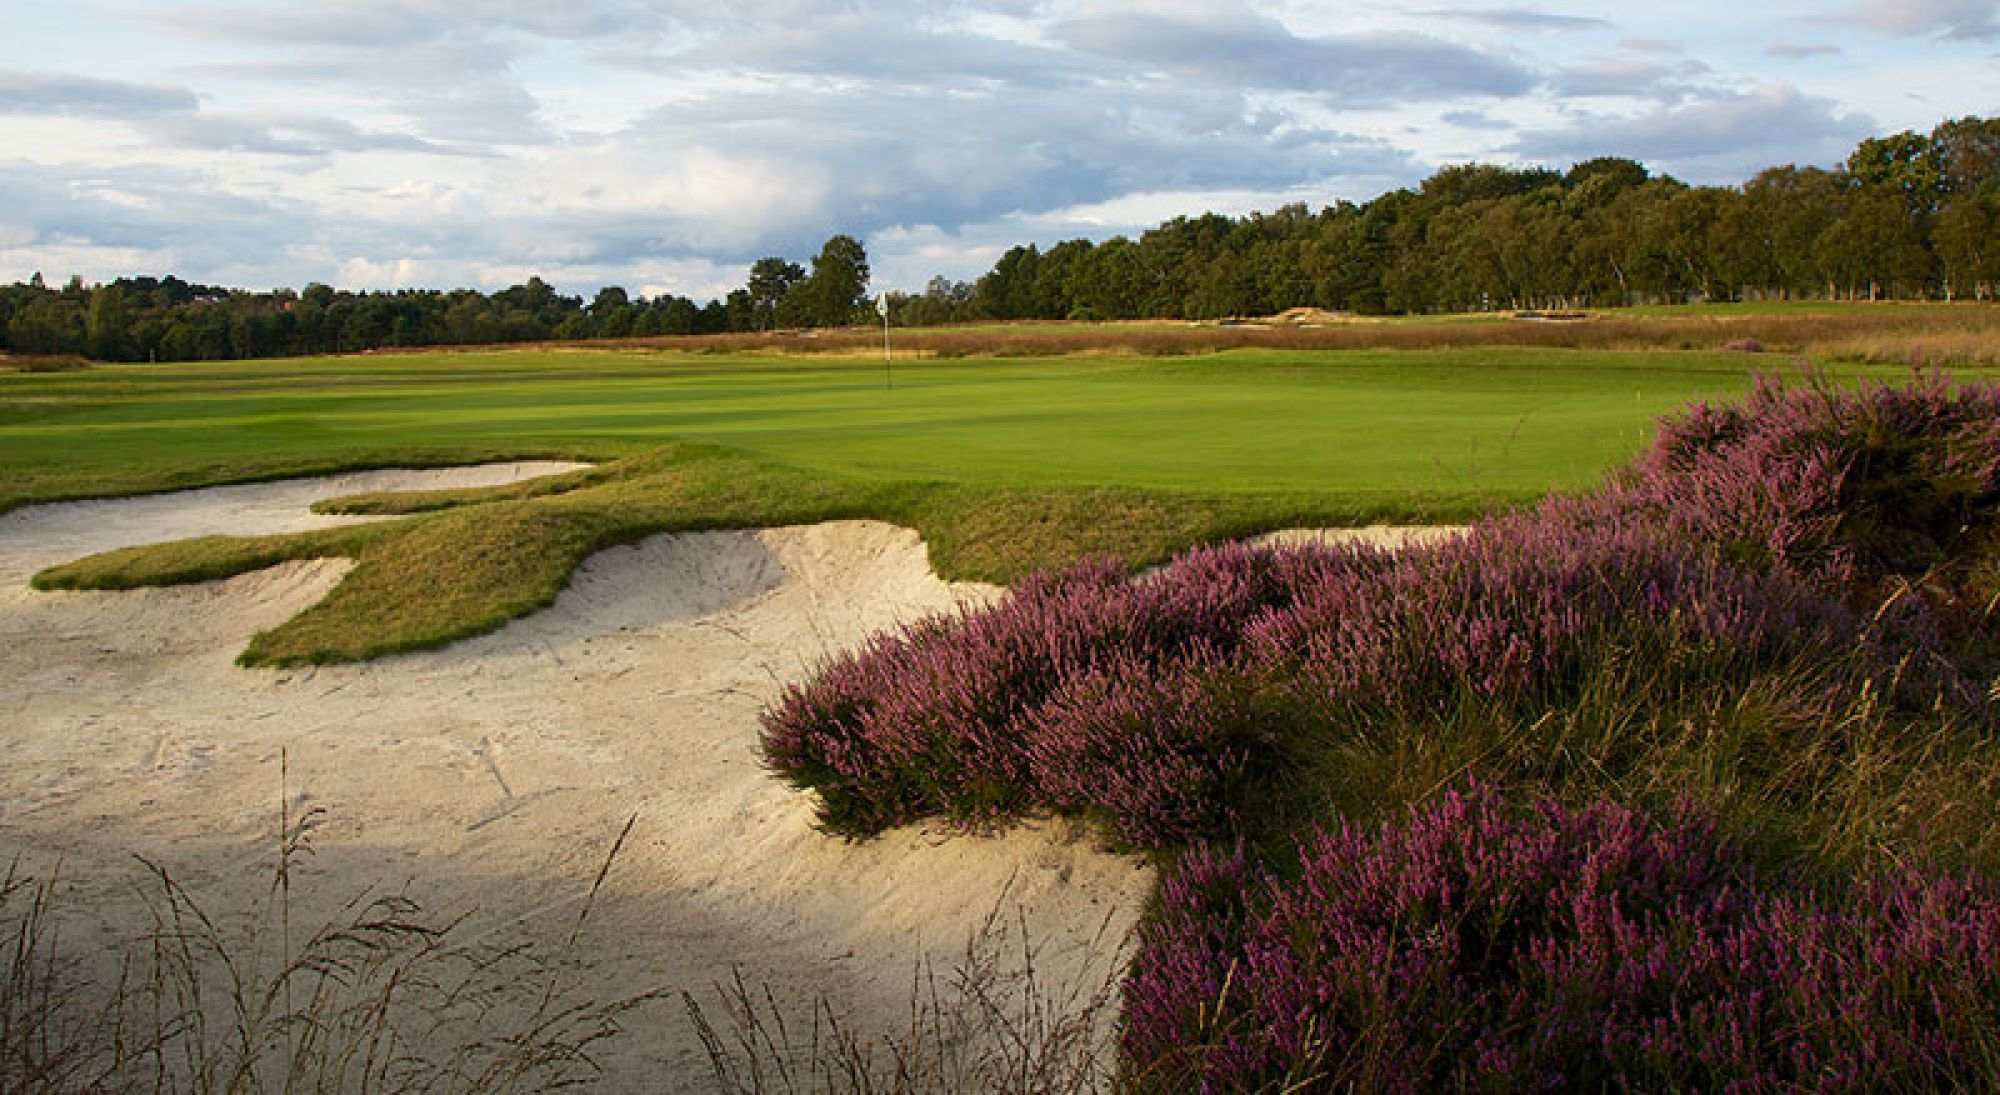 Moortown Golf Club includes among the most popular golf course within Yorkshire